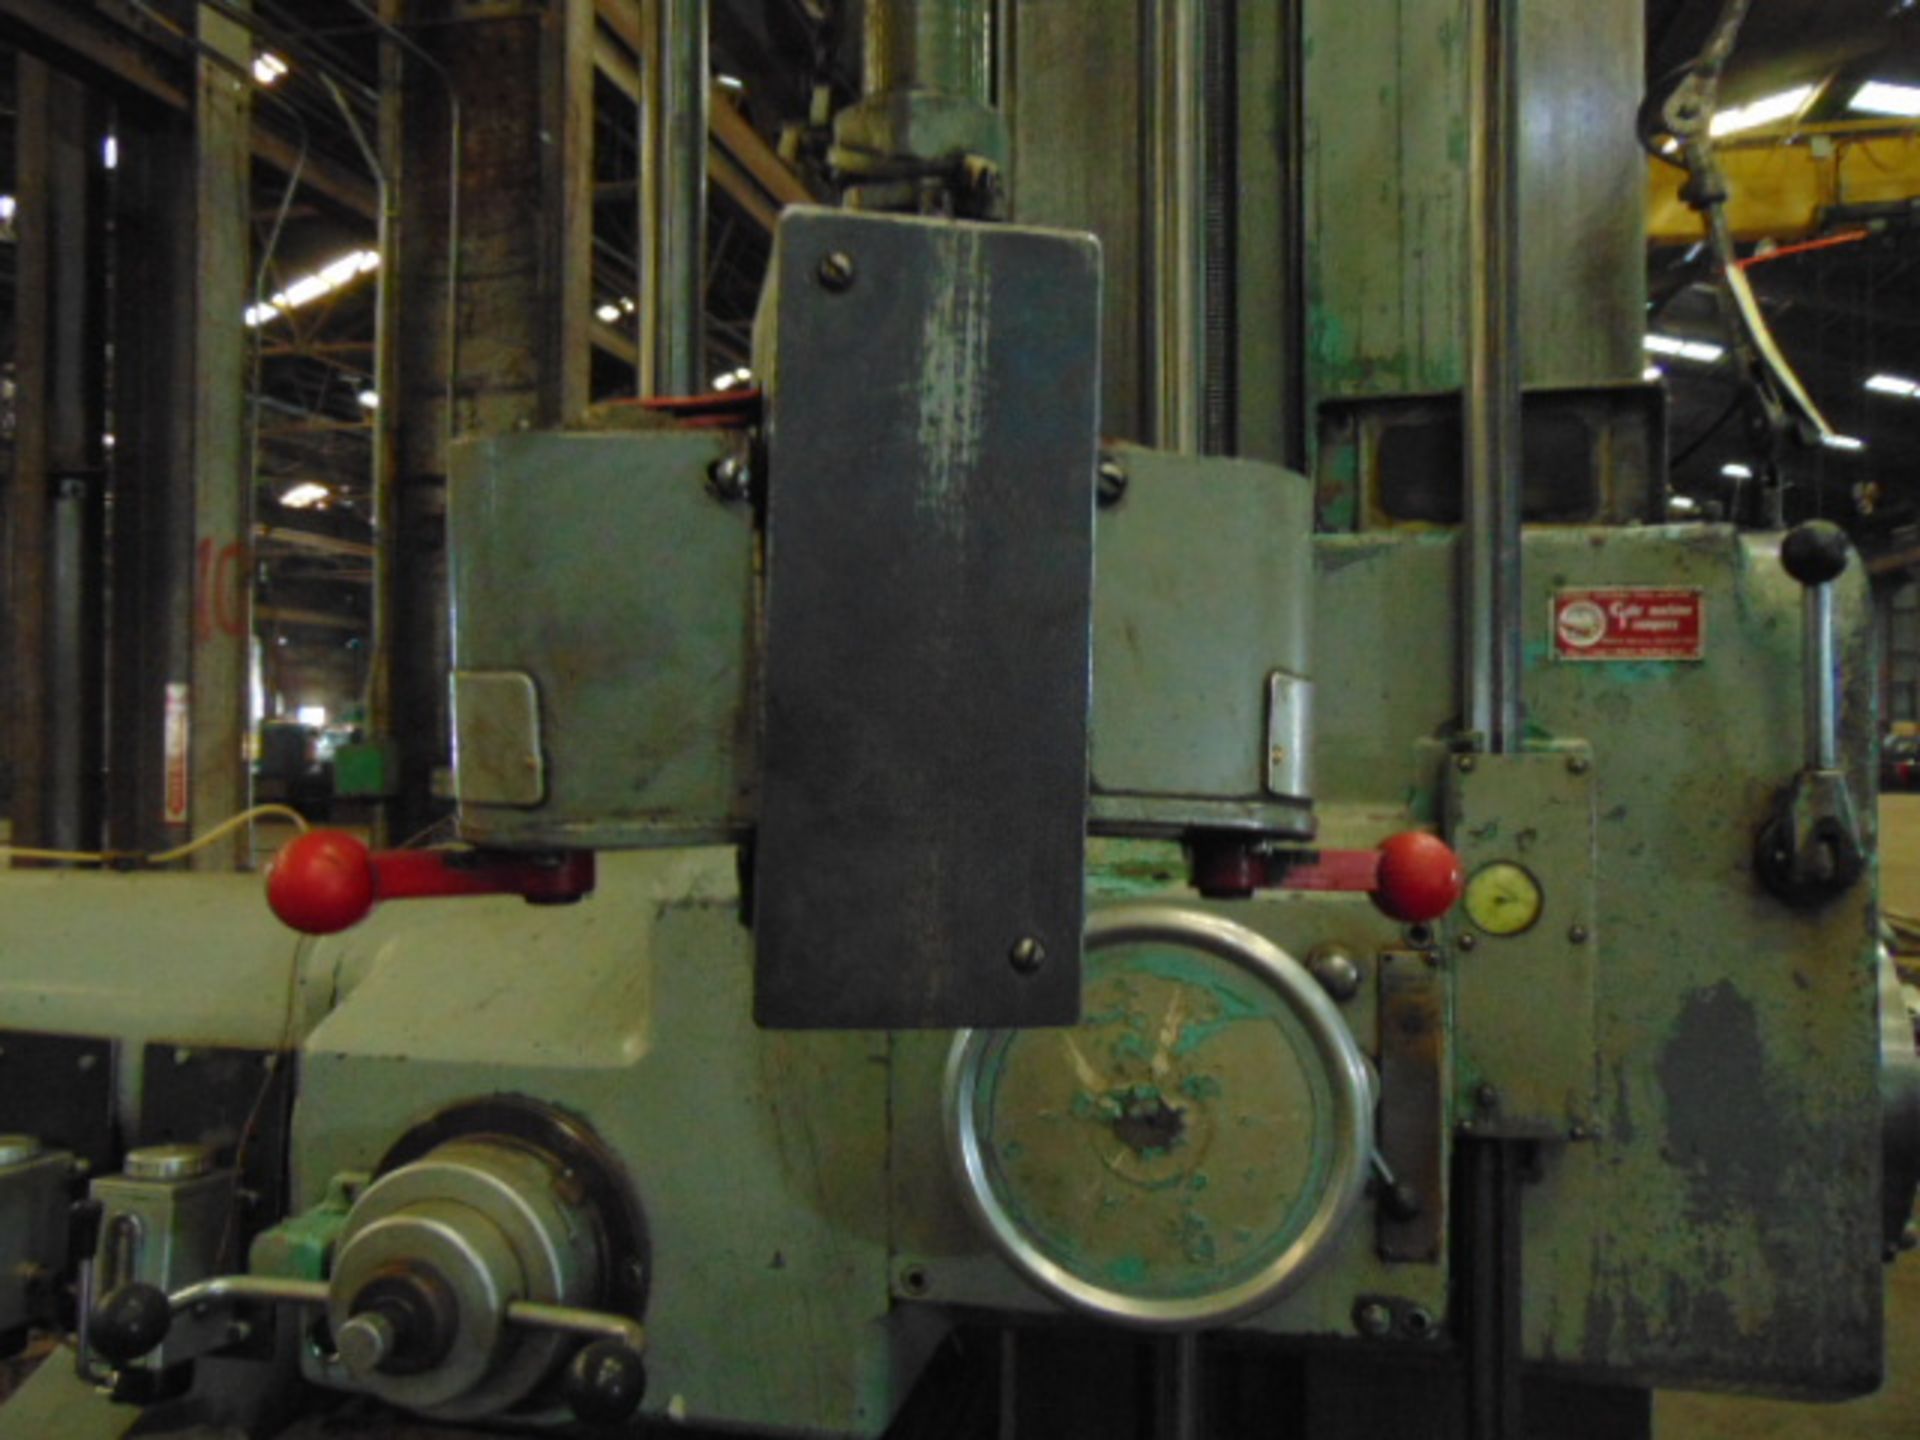 TABLE TYPE HORIZONTAL BORING MILL, LUCAS MDL. 428-60, 40" x 74" tbl., 60" cross travel, approx. - Image 6 of 16